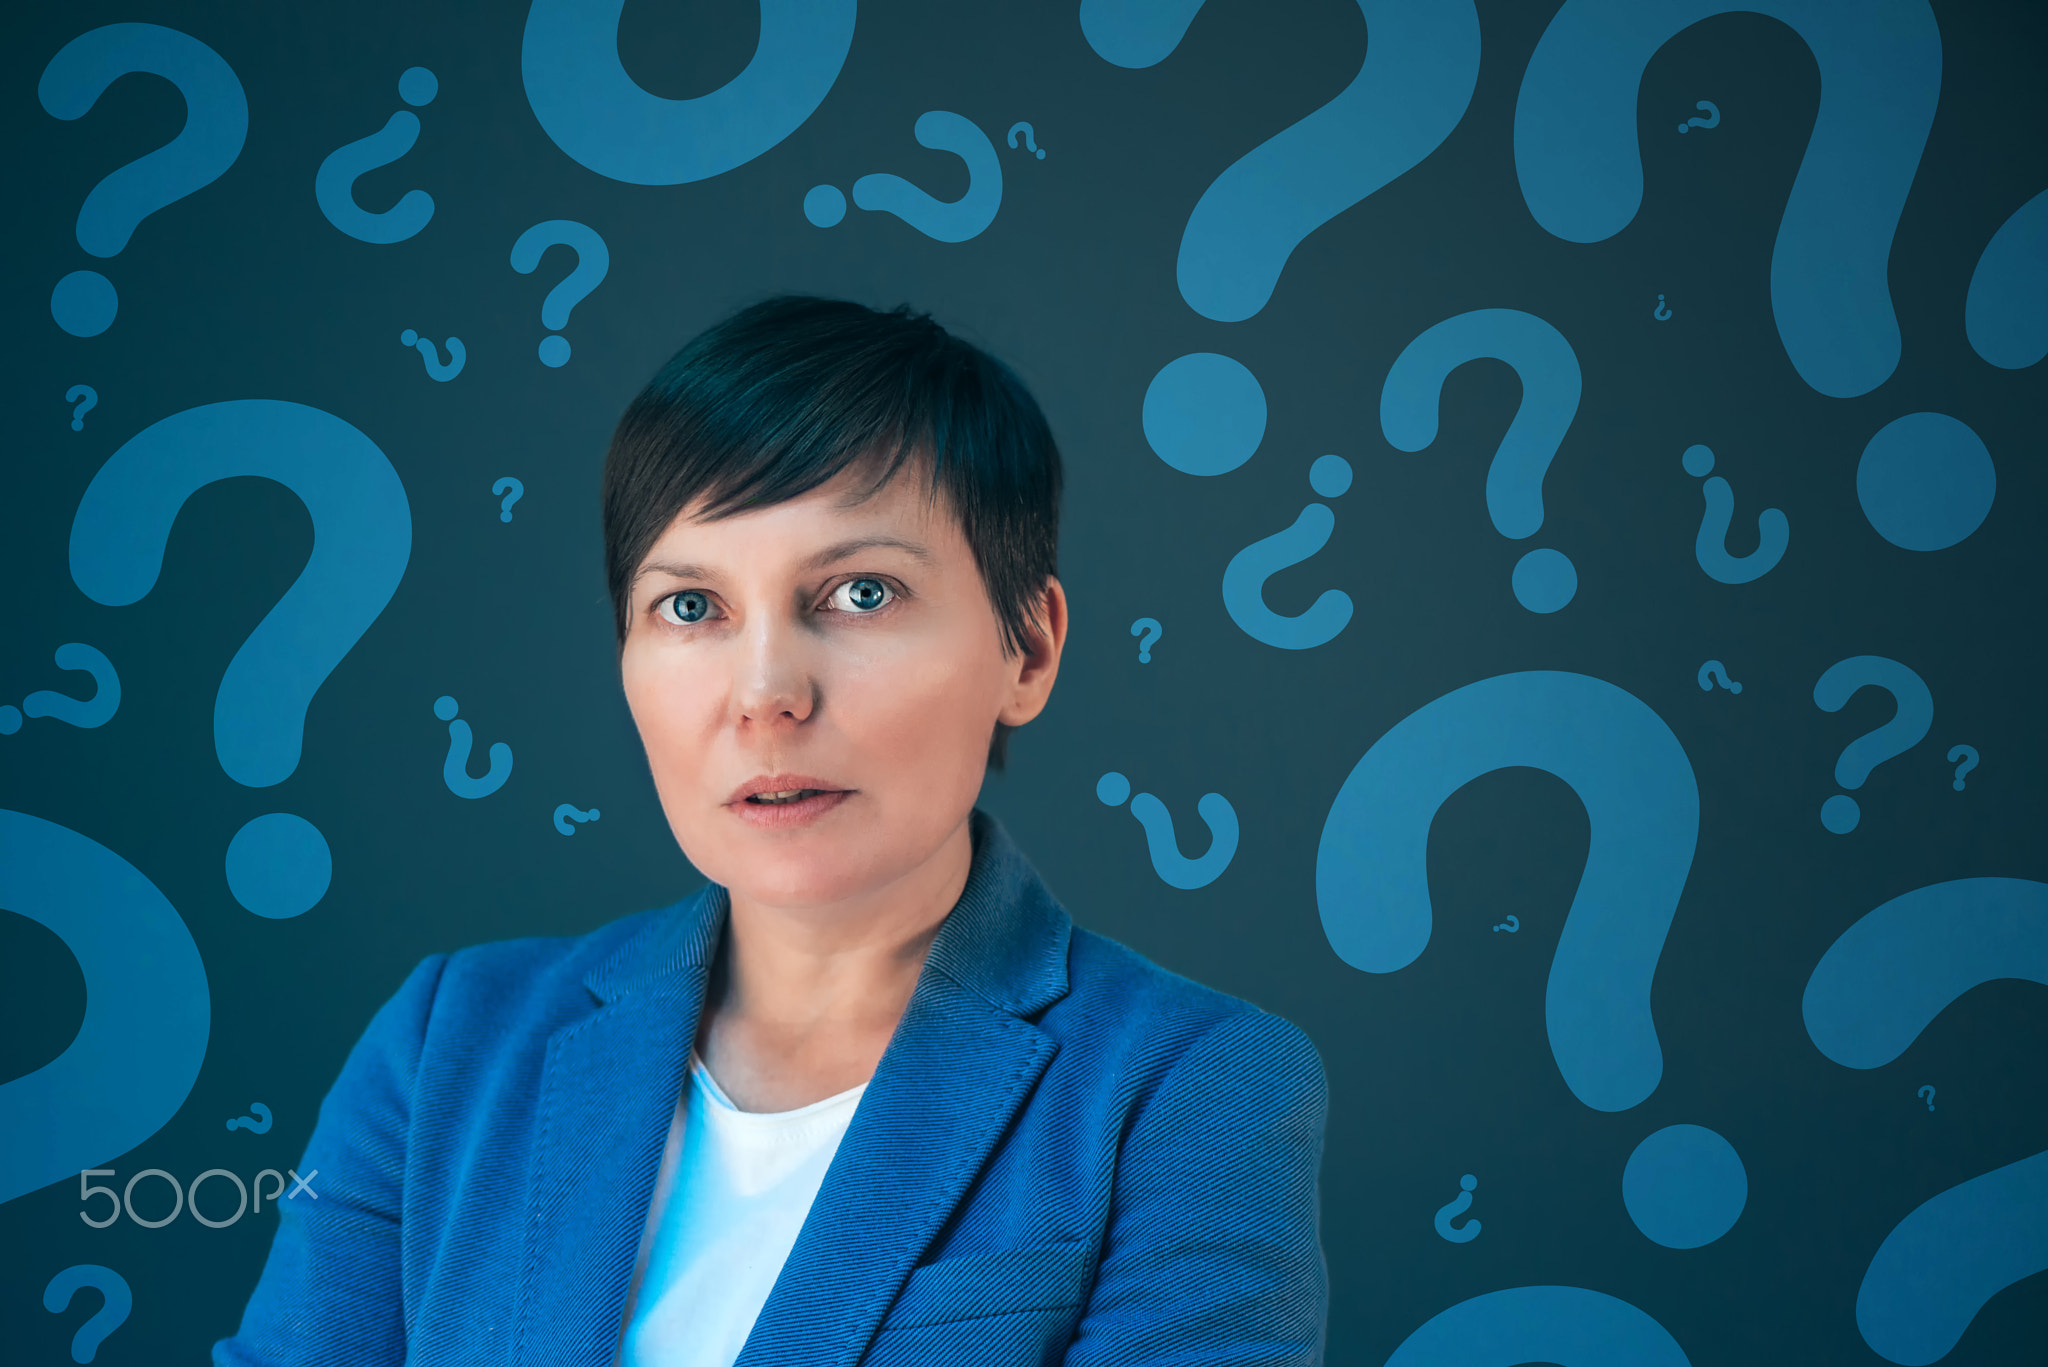 Business woman with question mark looking for answers